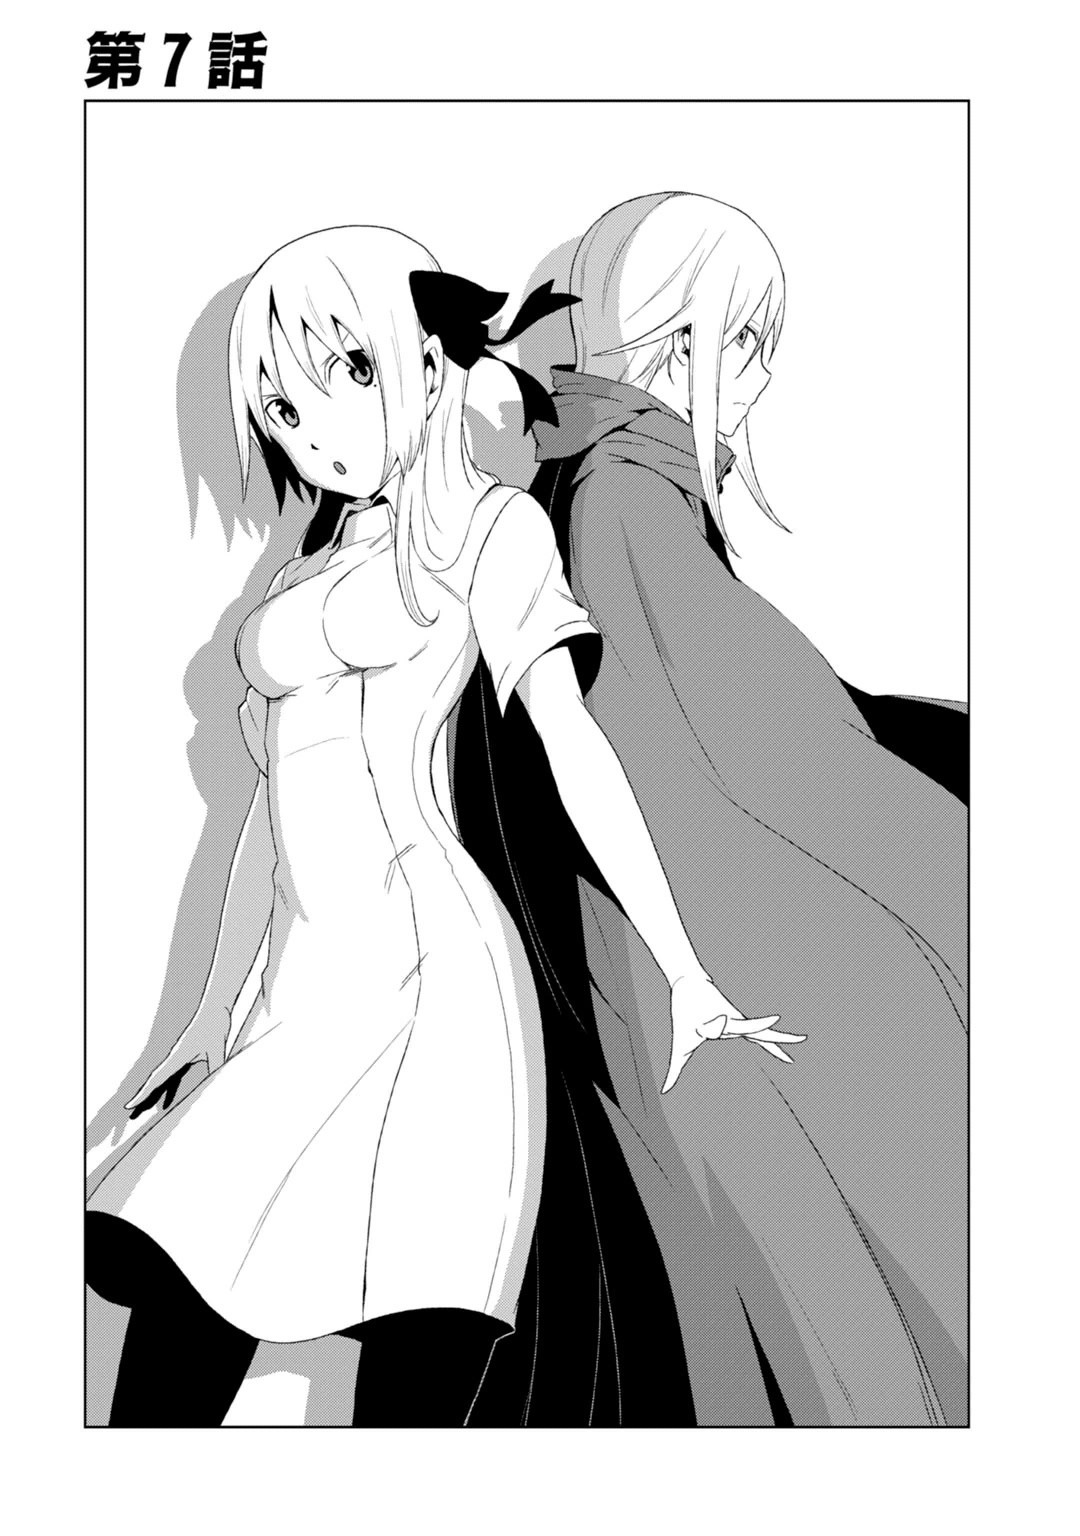 Between Disciple and Lover - Chapter 21 - Coffee Manga